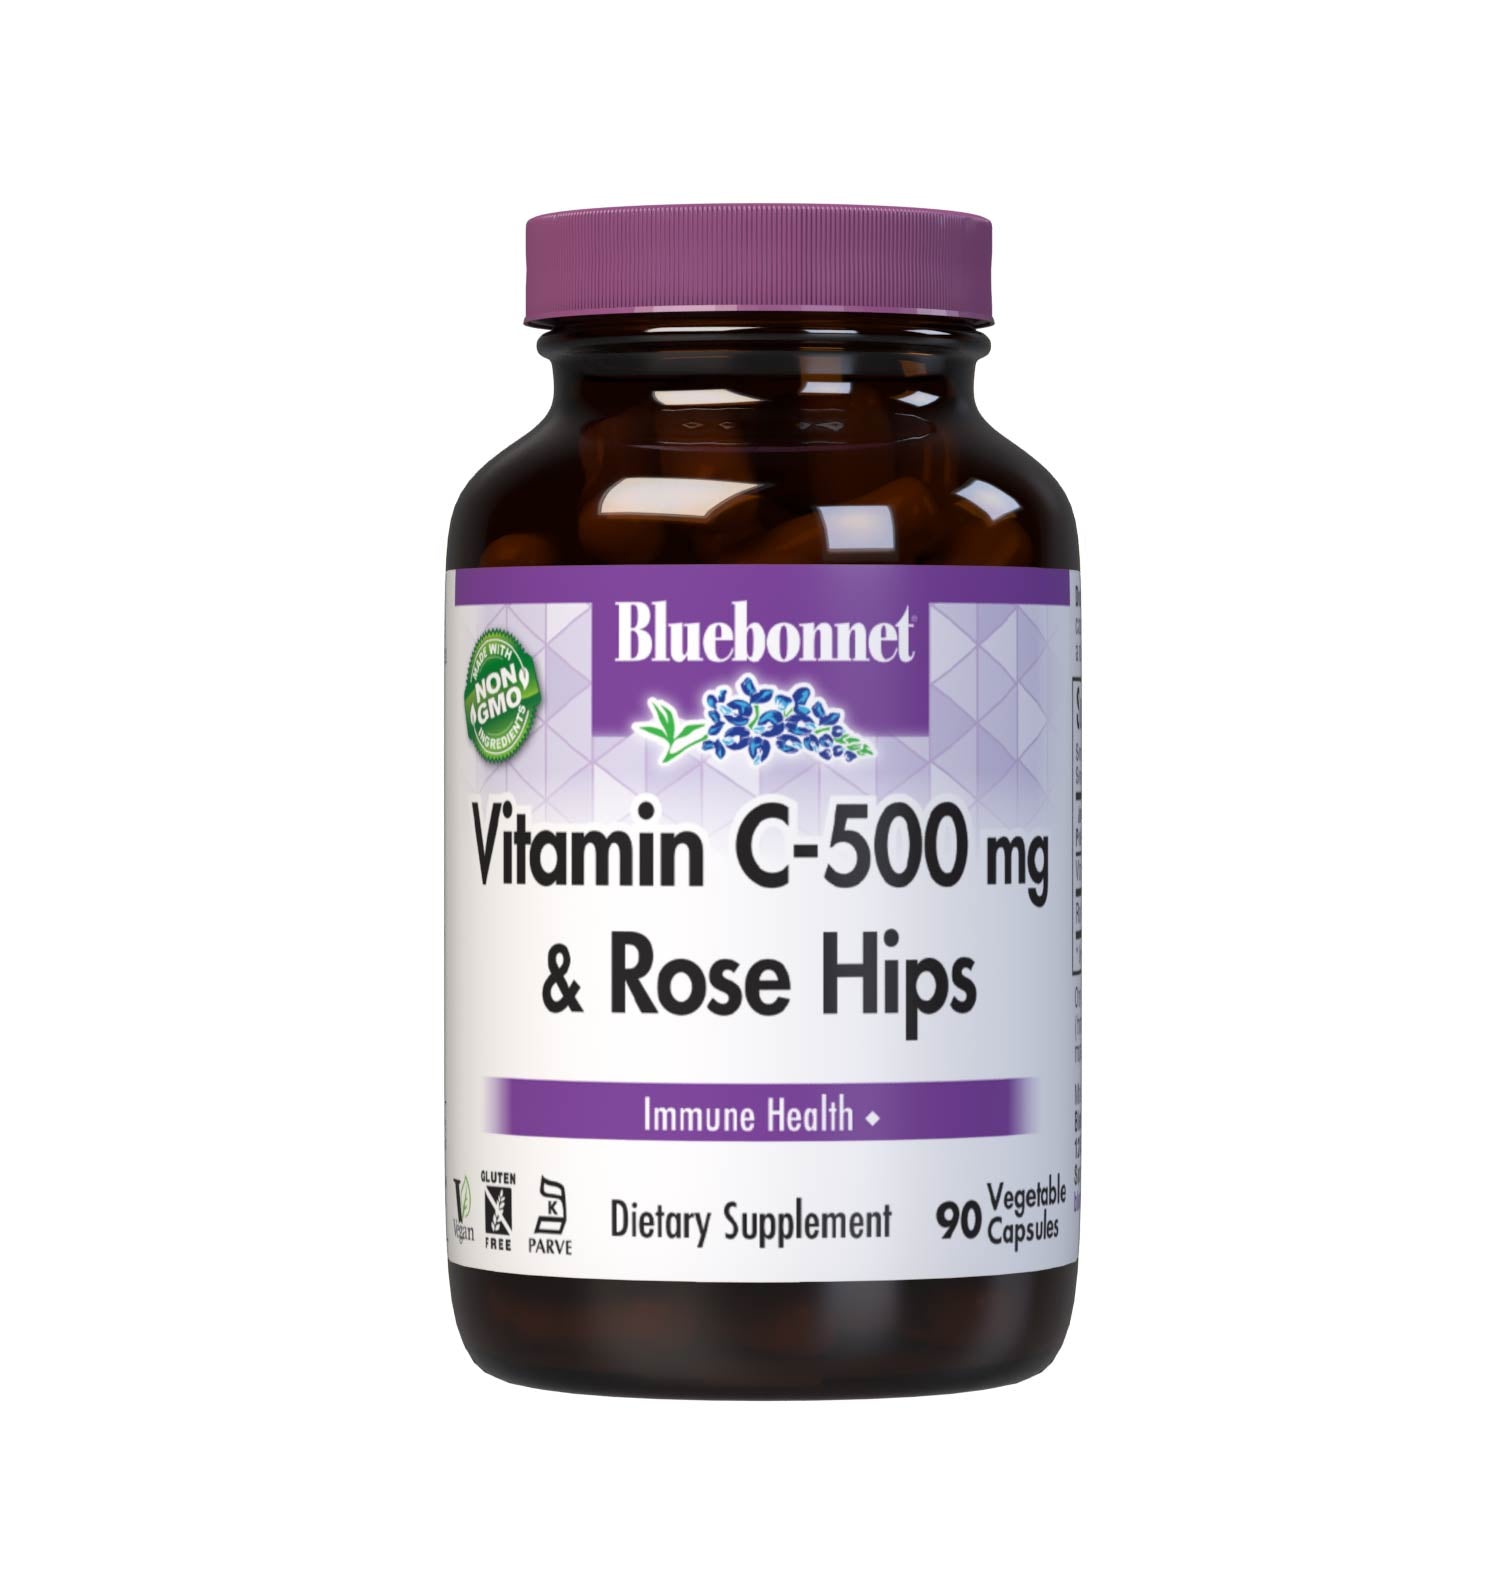 Bluebonnet’s Vitamin C-500 mg & Rose Hips 90 Vegetable Capsules are formulated with non-GMO, identity preserved (IP) vitamin C from L-ascorbic acid and rose hips to help support immune function. #size_90 count